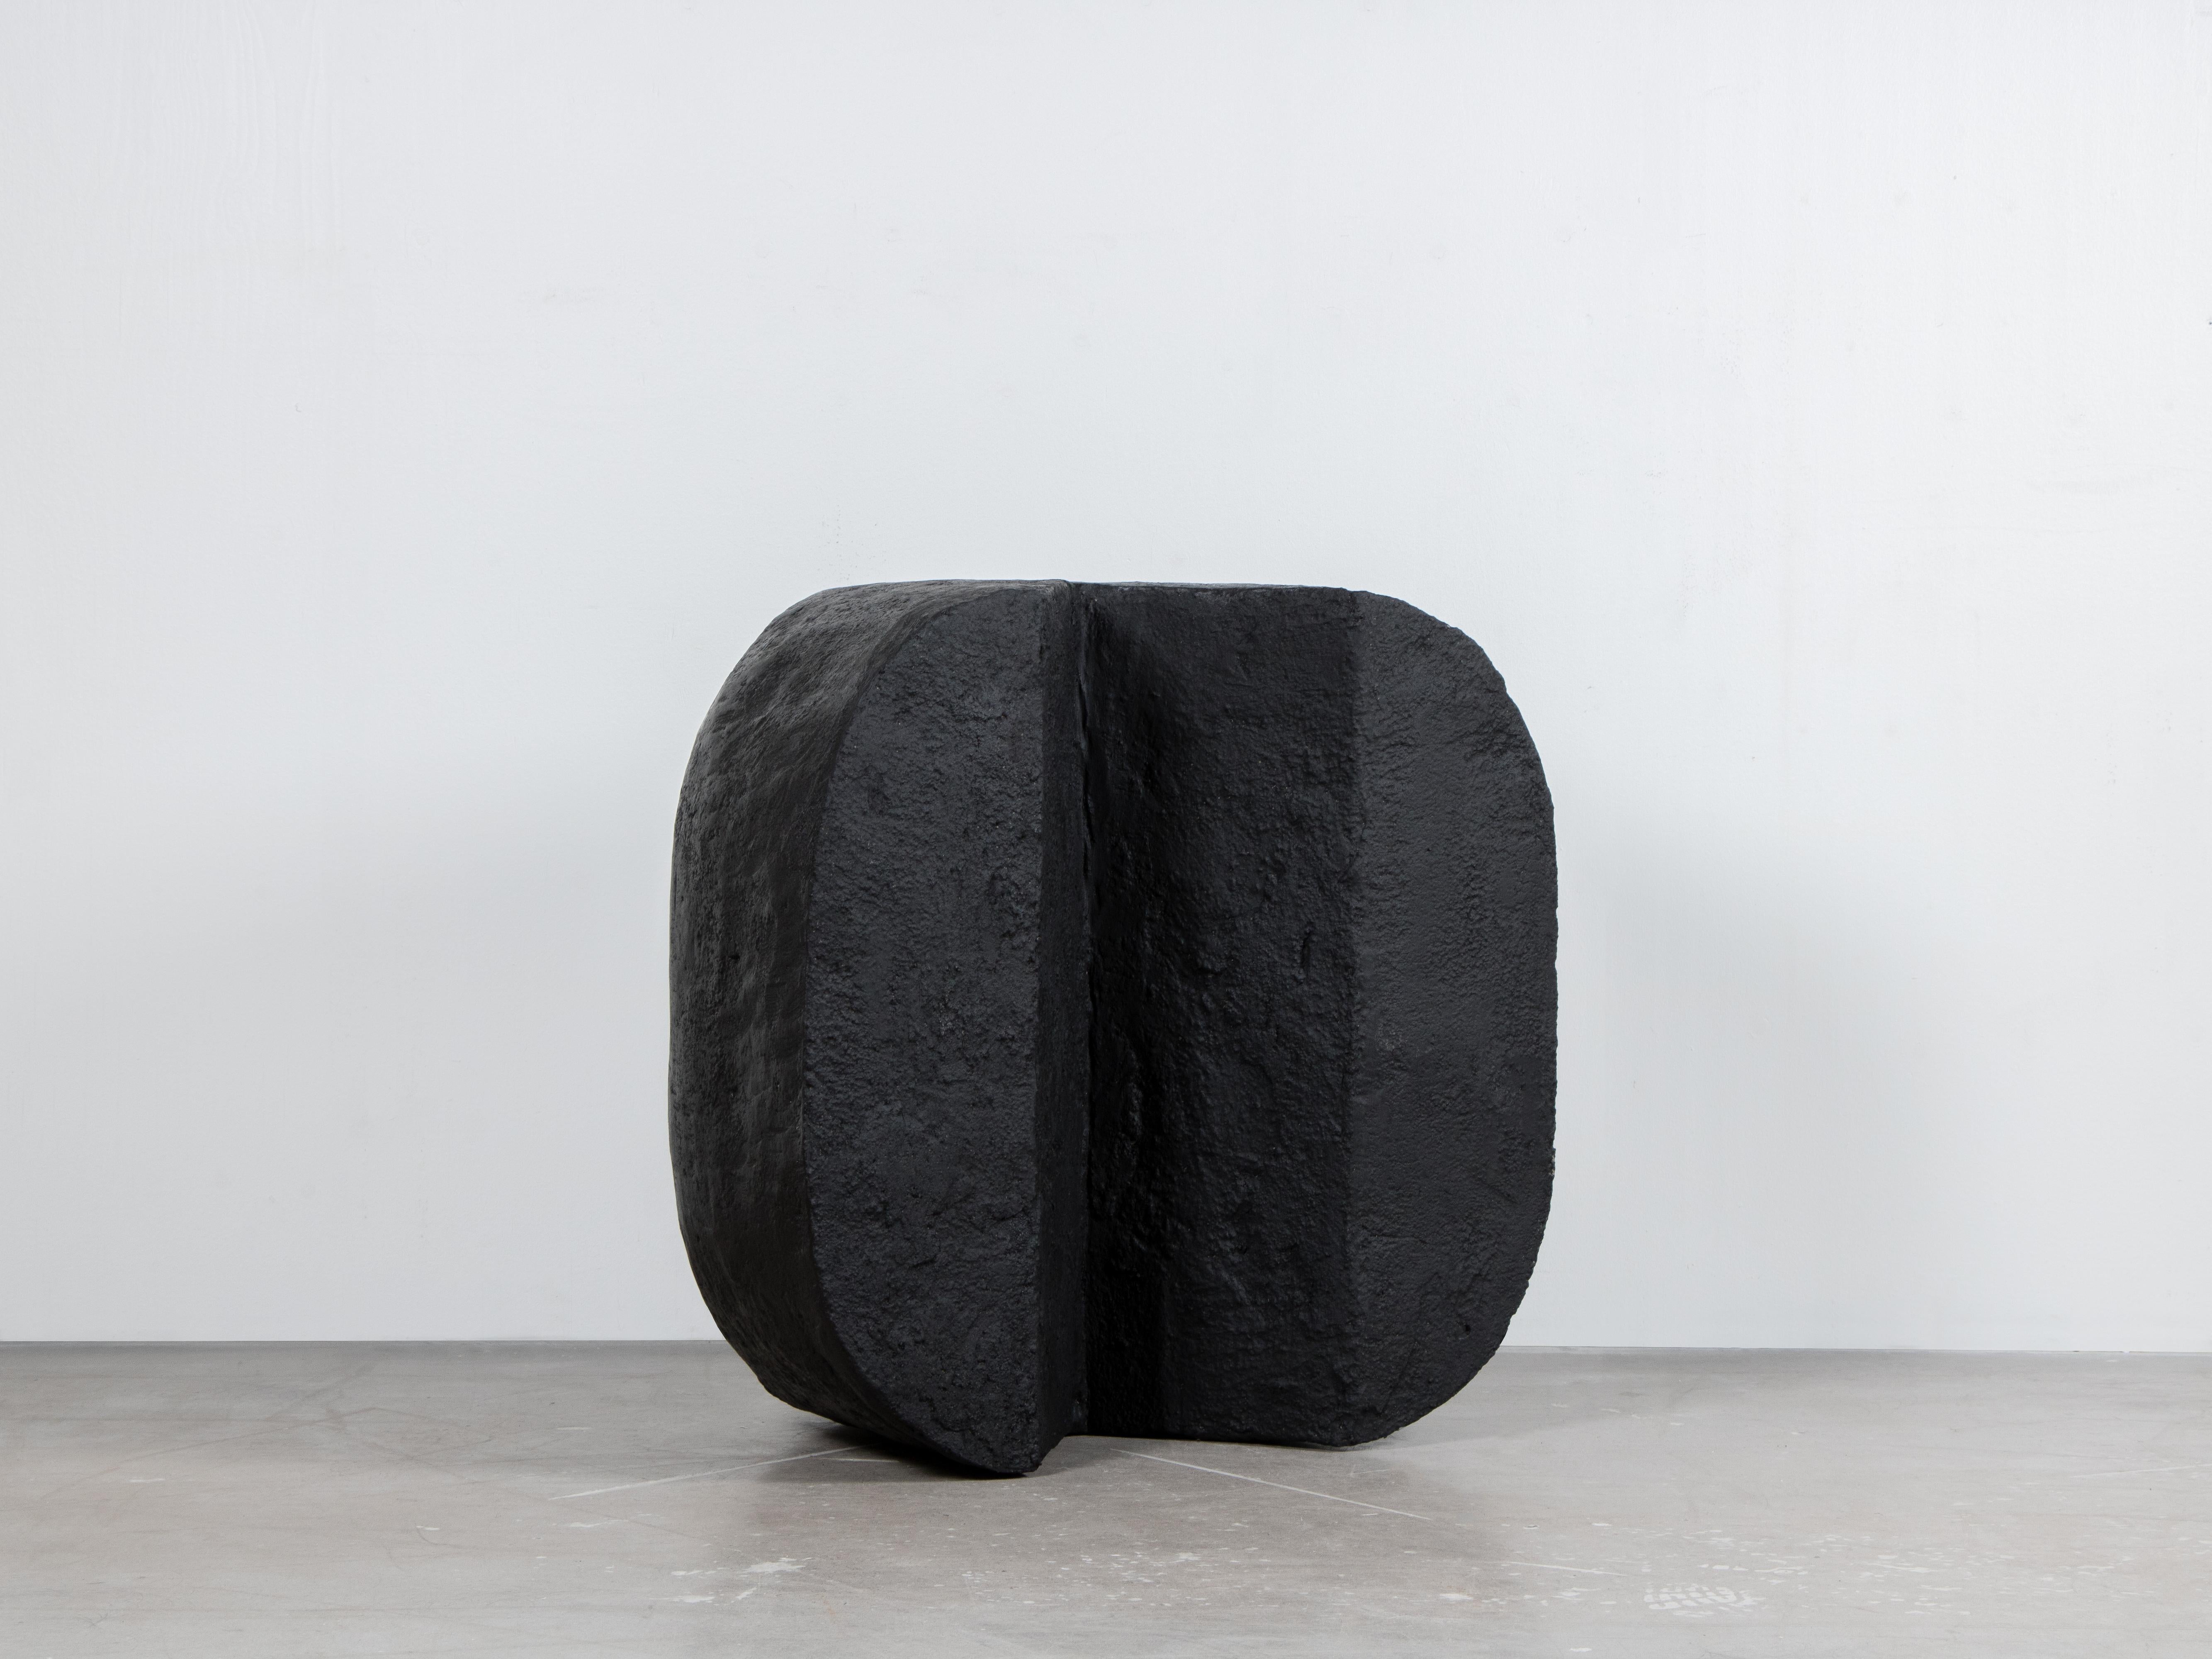 Contemporary Black Stool / Side Table in Concrete, Sten Stool by Lucas Morten In New Condition For Sale In Warsaw, PL